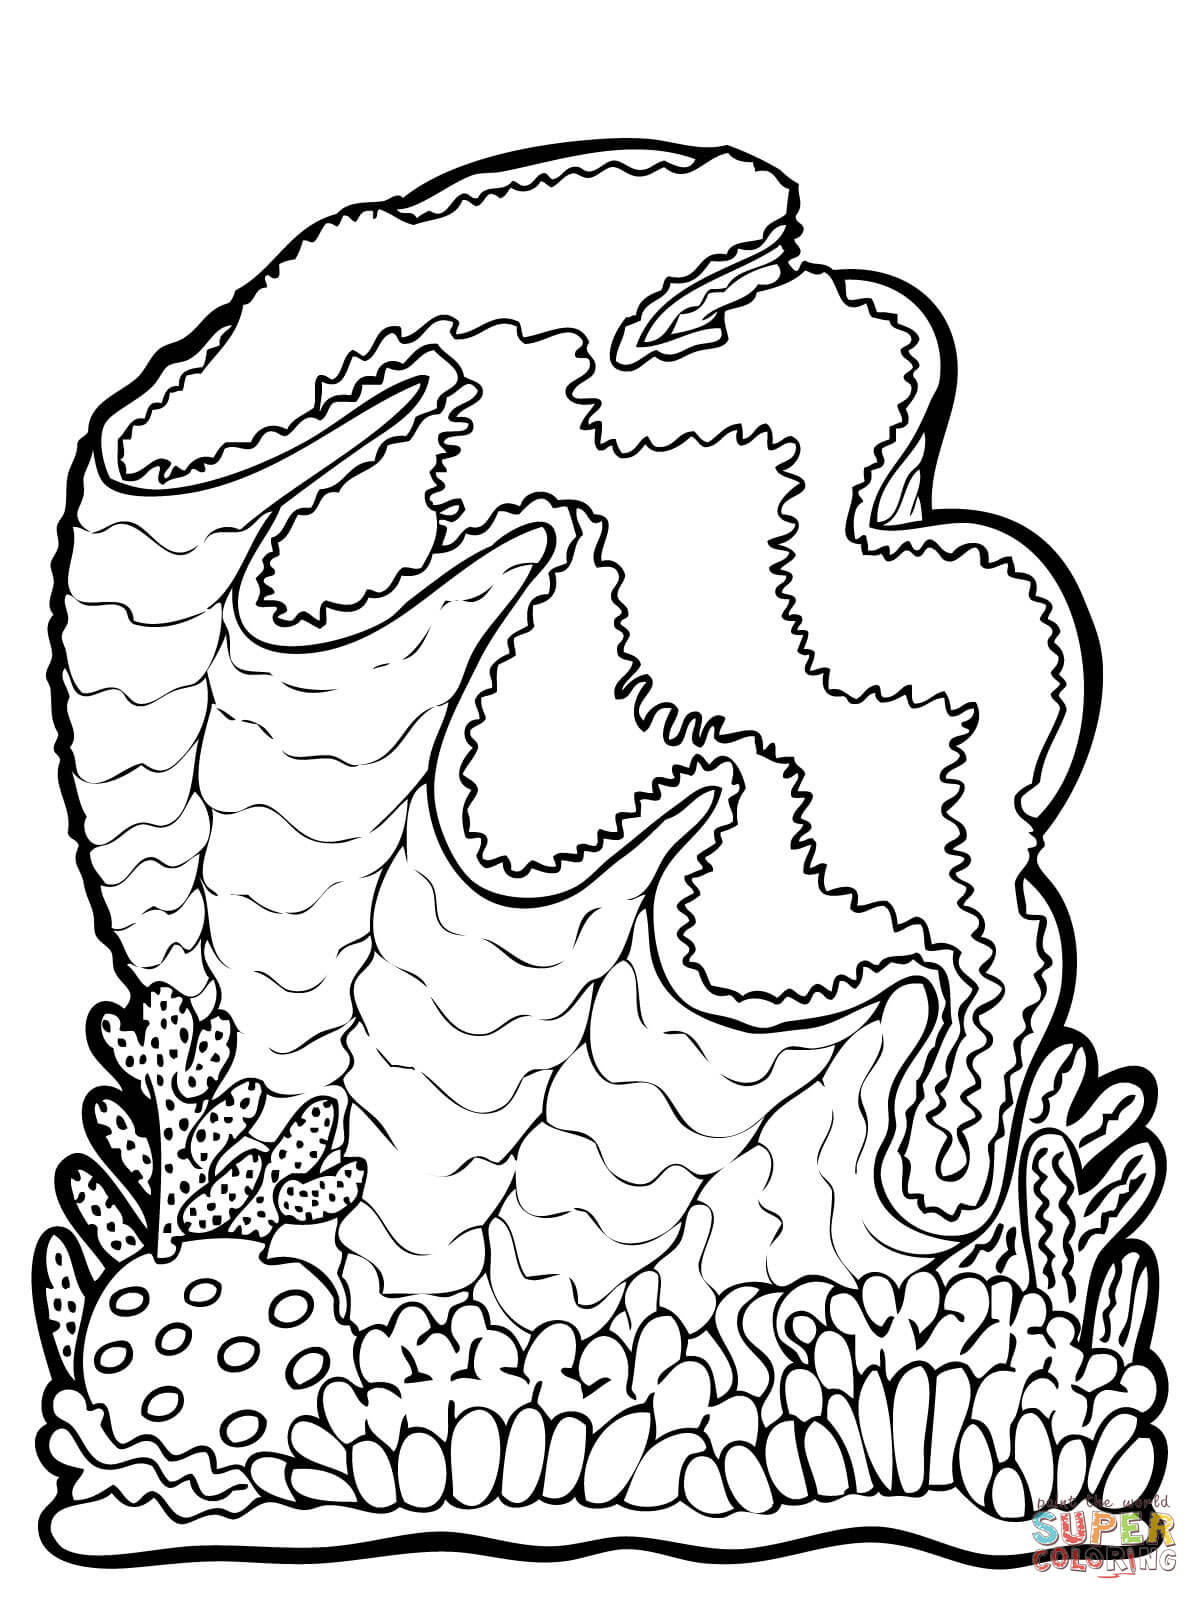 Clam coloring pages | Free Coloring Pages